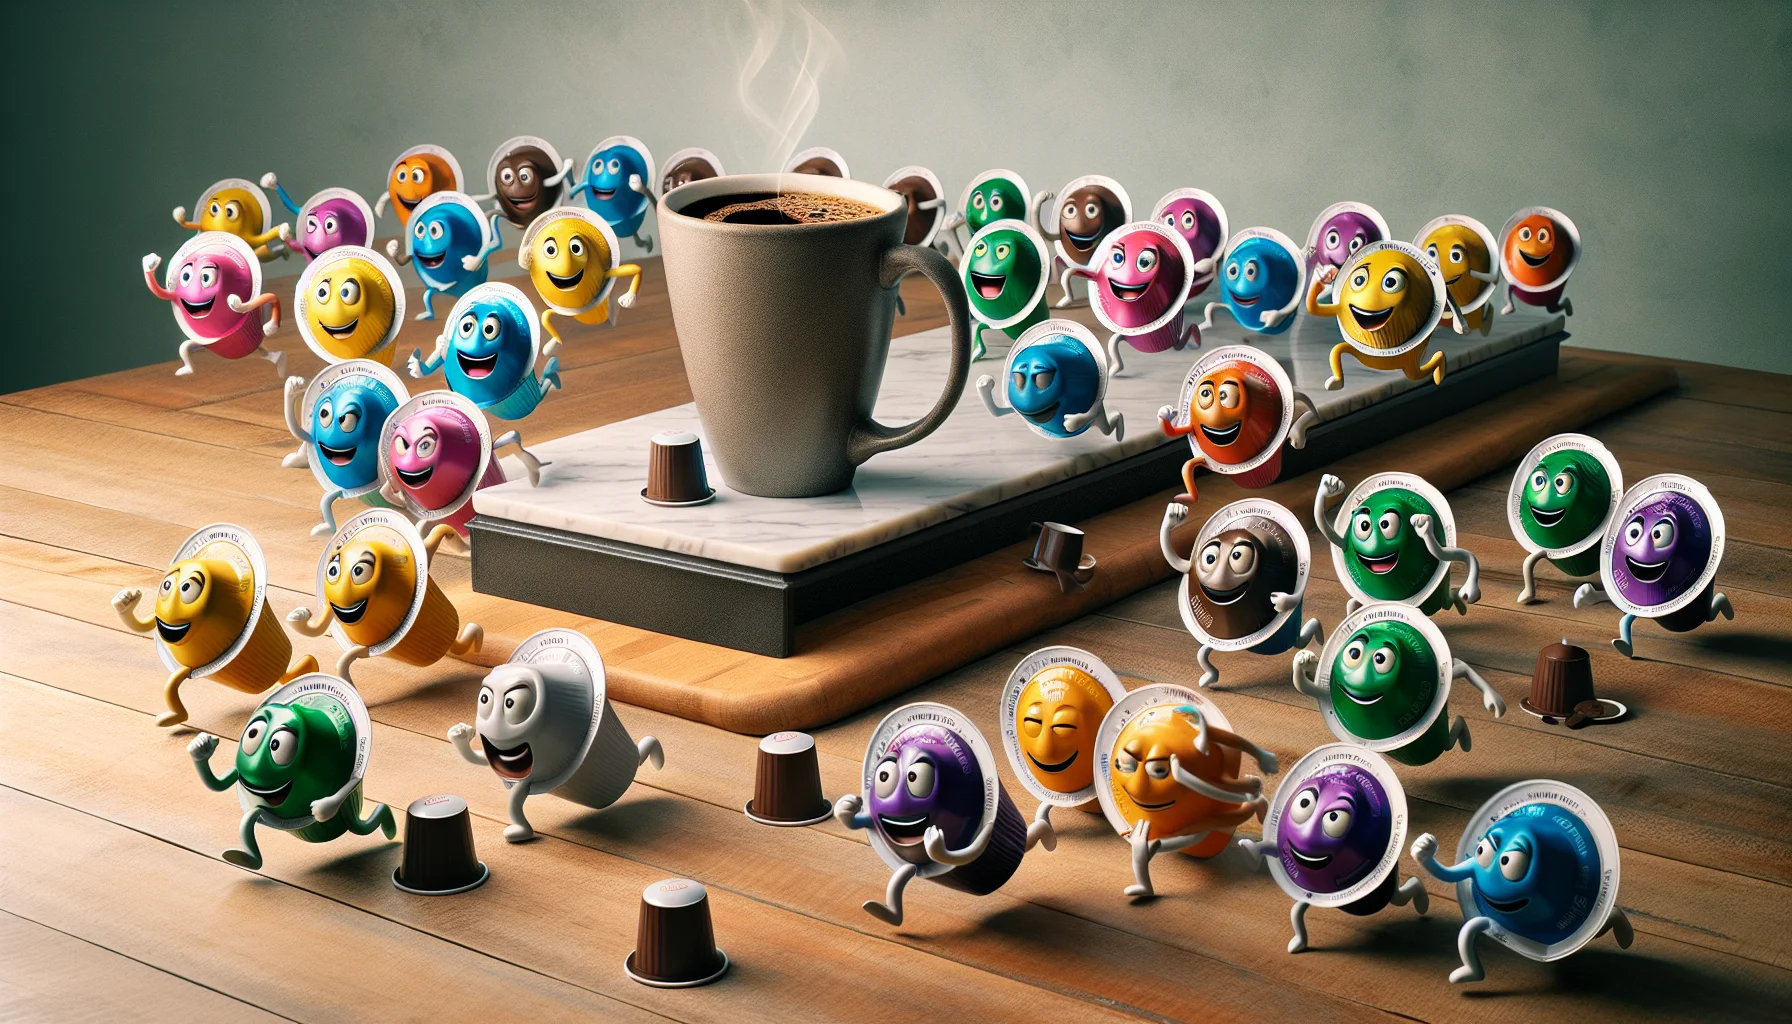 Create a humorous visual narrative that adds a touch of whimsy to the everyday ritual of making espresso through Keurig pods. In this picture, imagine a group of anthropomorphic Keurig pods, each emanating a vivid hue representing its unique flavor. They're all engaged in a friendly relay race on a kitchen counter, sprinting past a coffee mug acting as the finishing point. Some are tipping over near the finish line, their faces showing comic surprise, while others are cheering with determination. This surreal yet inviting scene is a playful nod to the enjoyable process of choosing and brewing the perfect espresso pod.